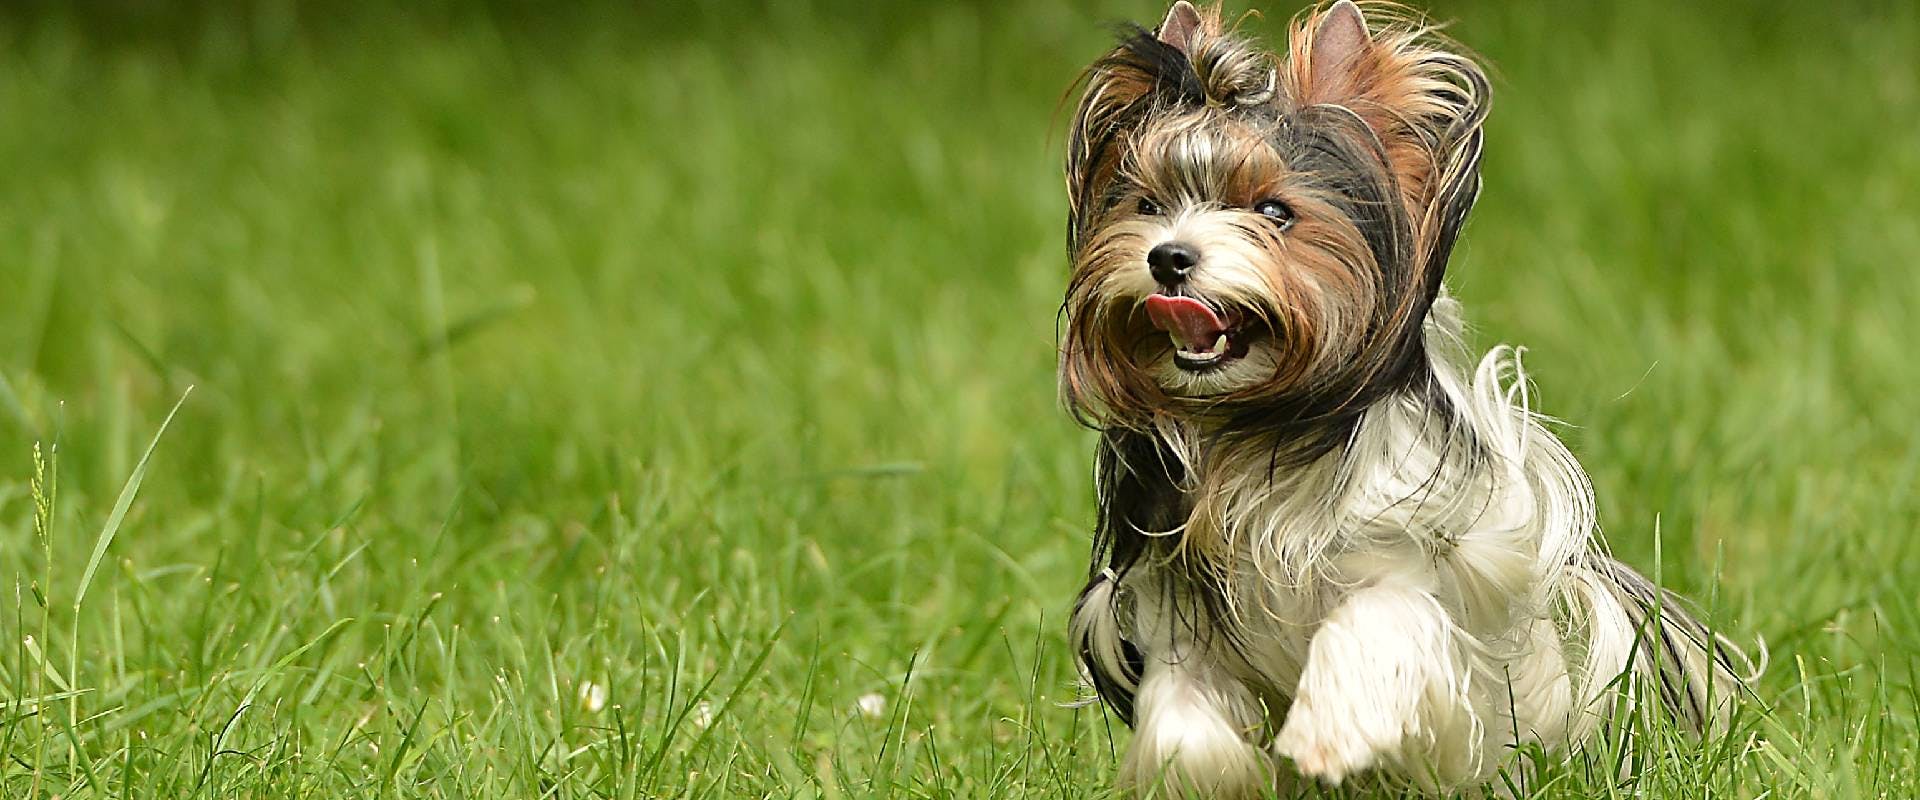 Long-haired Yorkie